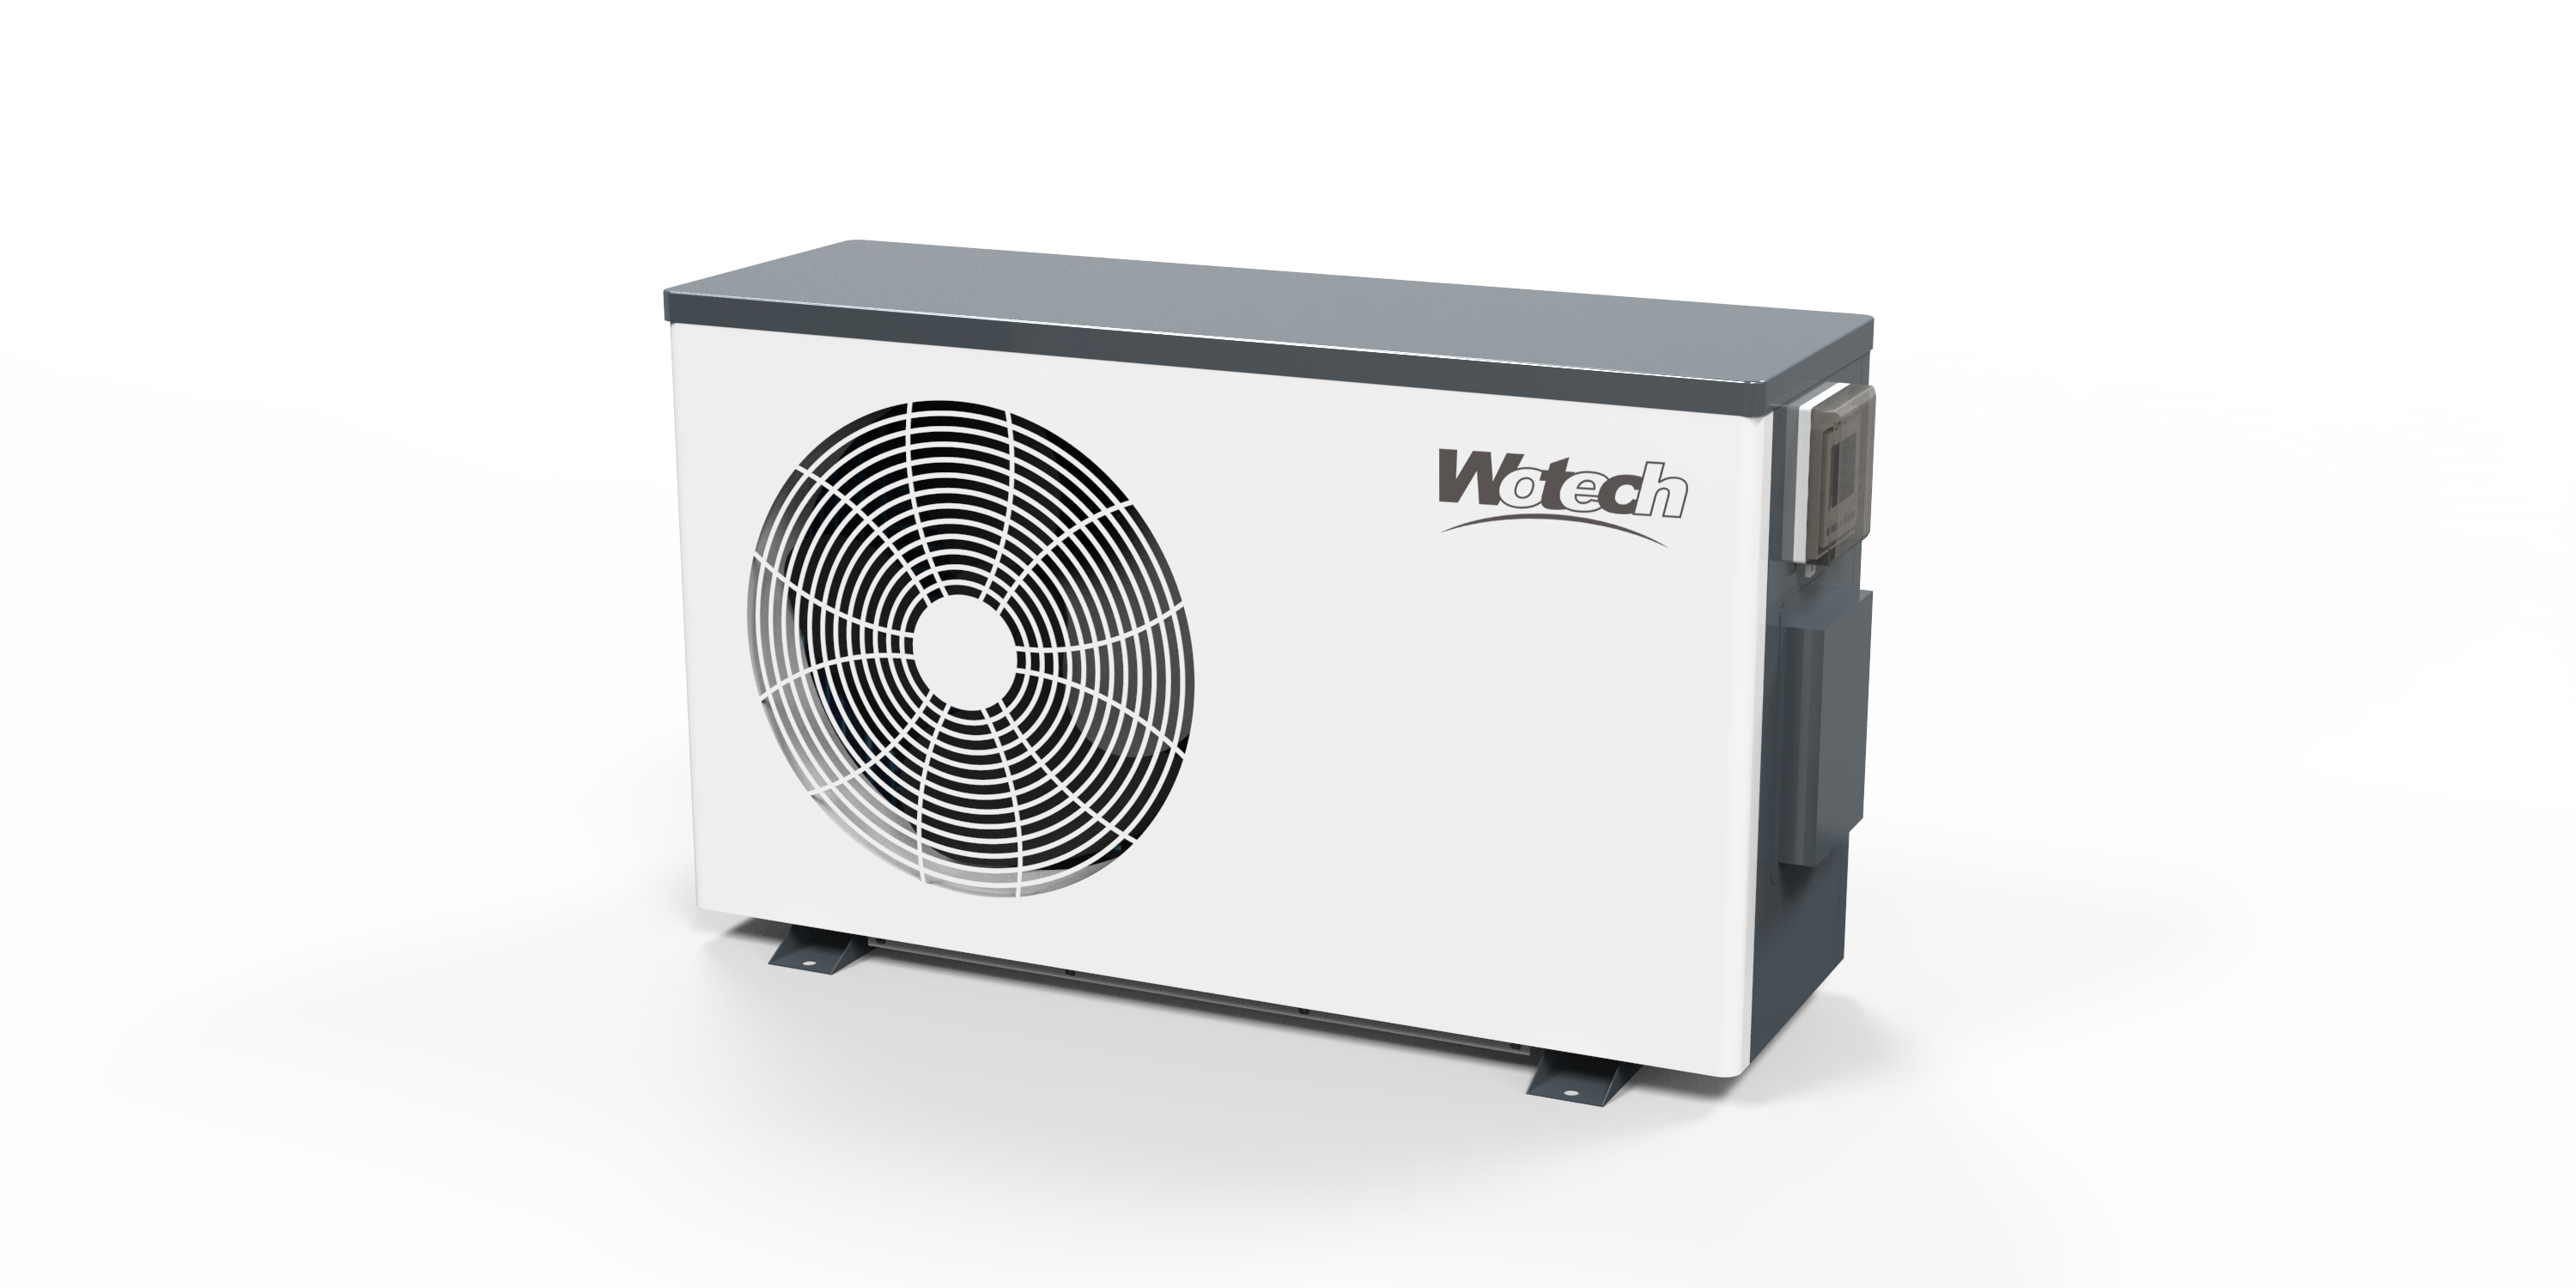 Energy-saving Air source heat pump with Eco Inverter and WIFI features